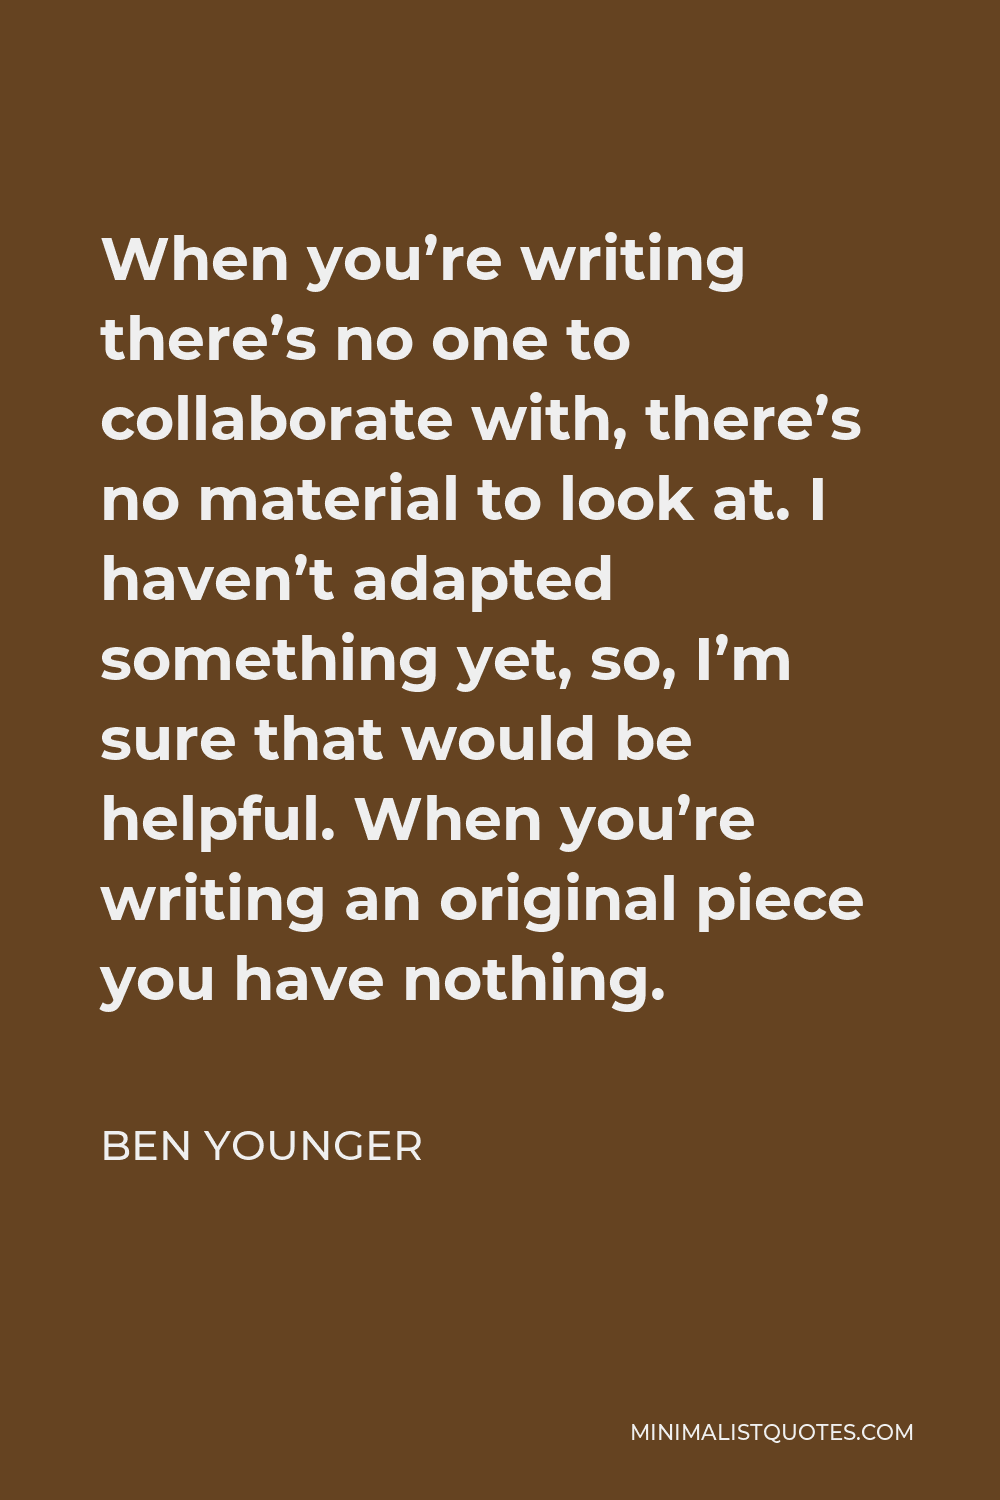 Ben Younger Quote - When you’re writing there’s no one to collaborate with, there’s no material to look at. I haven’t adapted something yet, so, I’m sure that would be helpful. When you’re writing an original piece you have nothing.